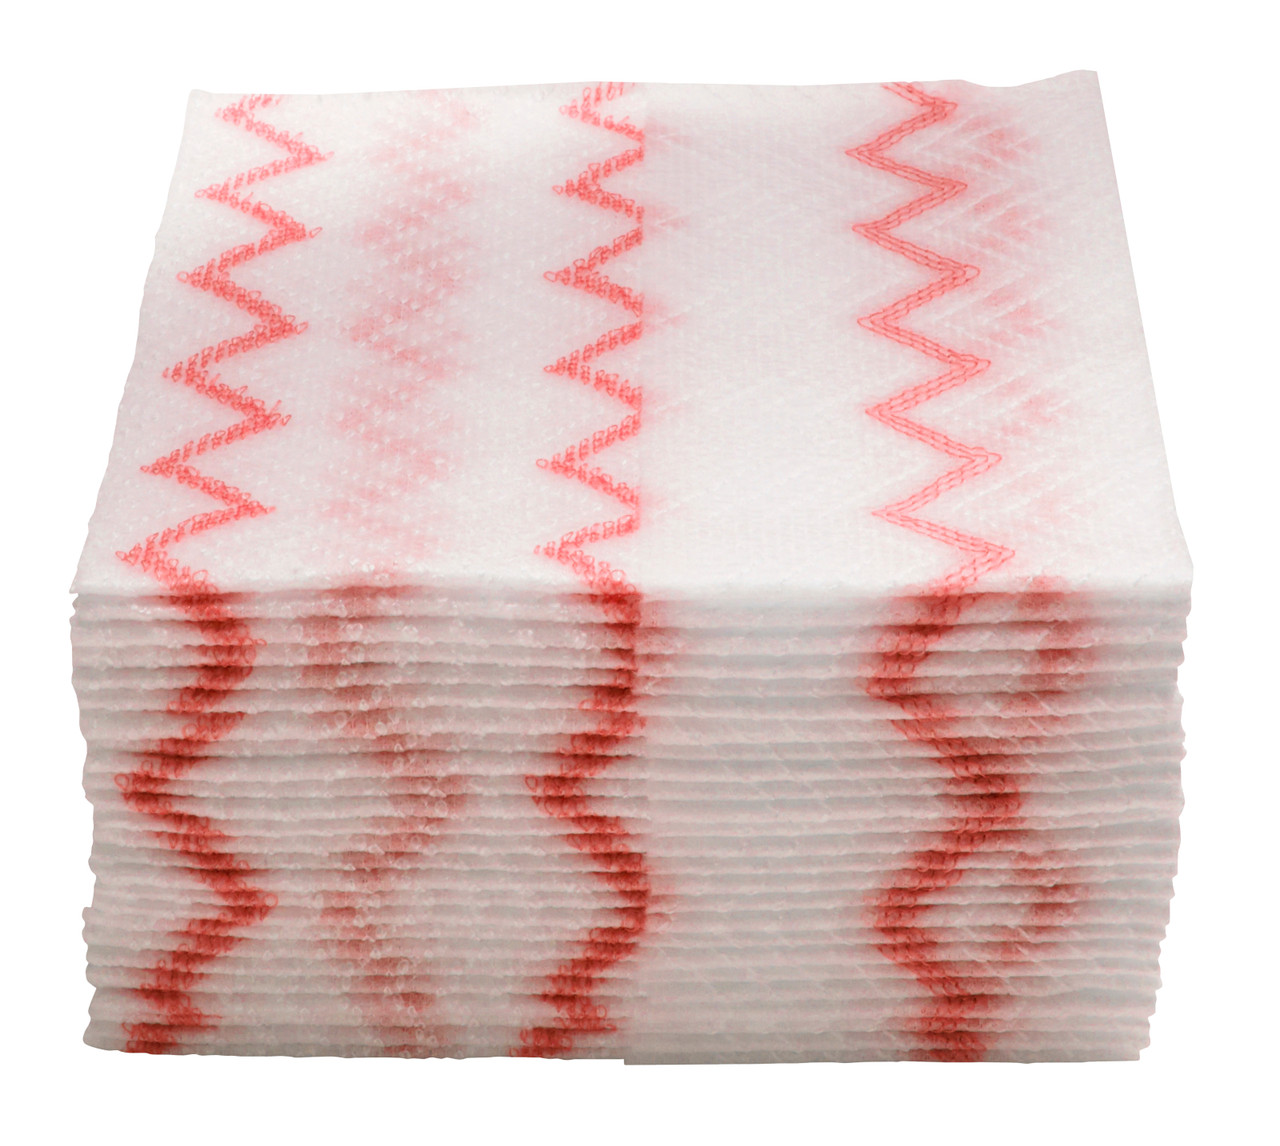 2135888 - Rubbermaid Disposable Microfibre Cloth - Red - Zig-zag scrubbing pattern capable of effectively removing dirt, debris, grime and stubborn stains